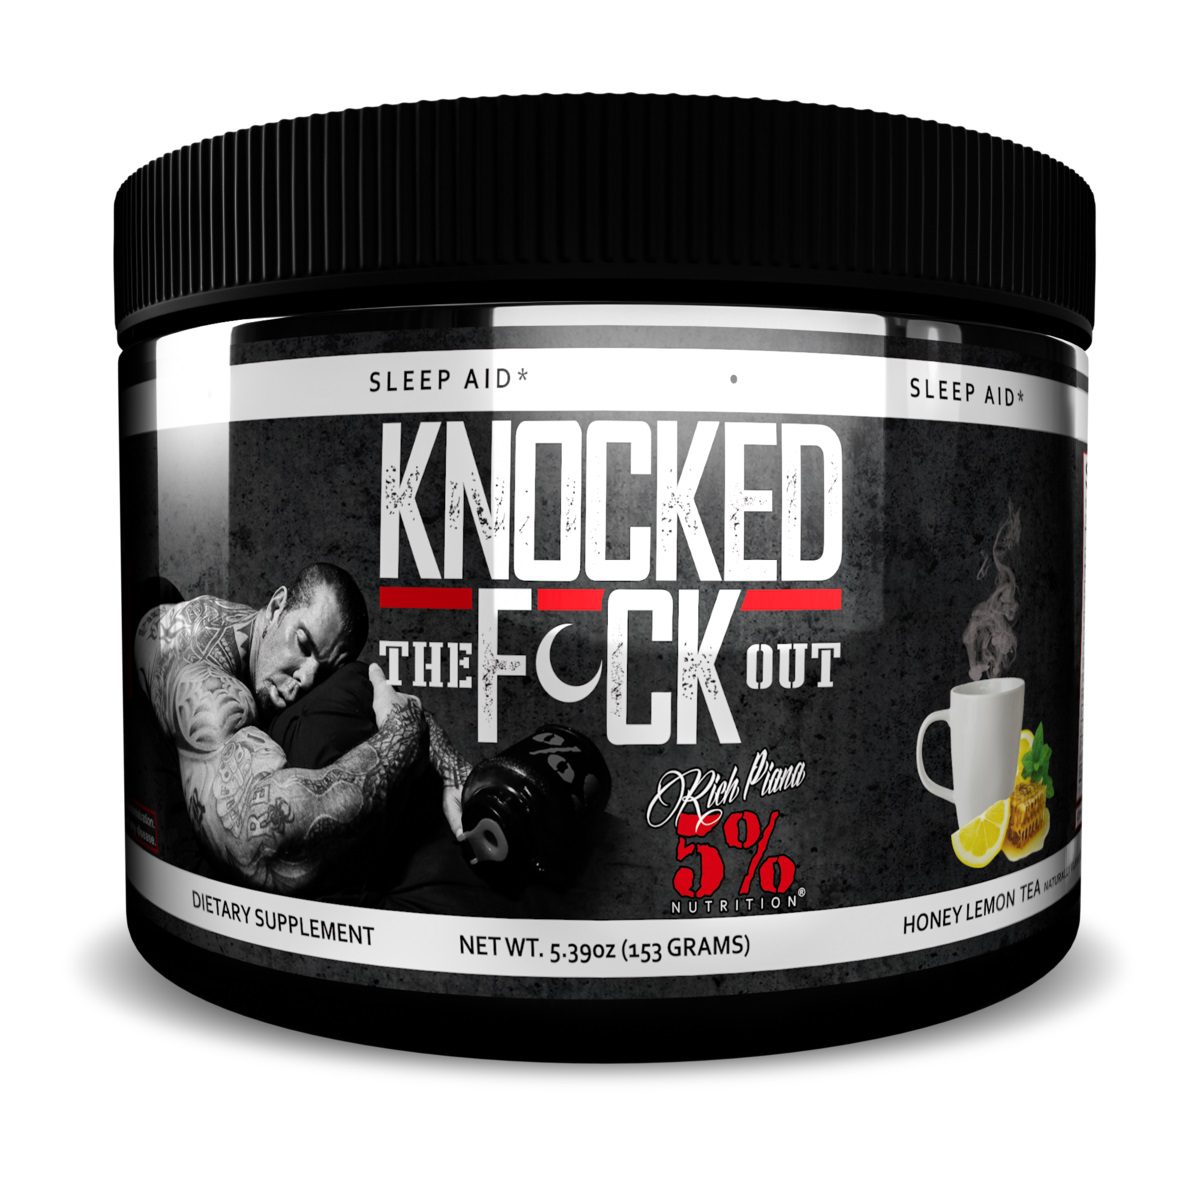 5% de nutrition - Knocked The F*ck Out